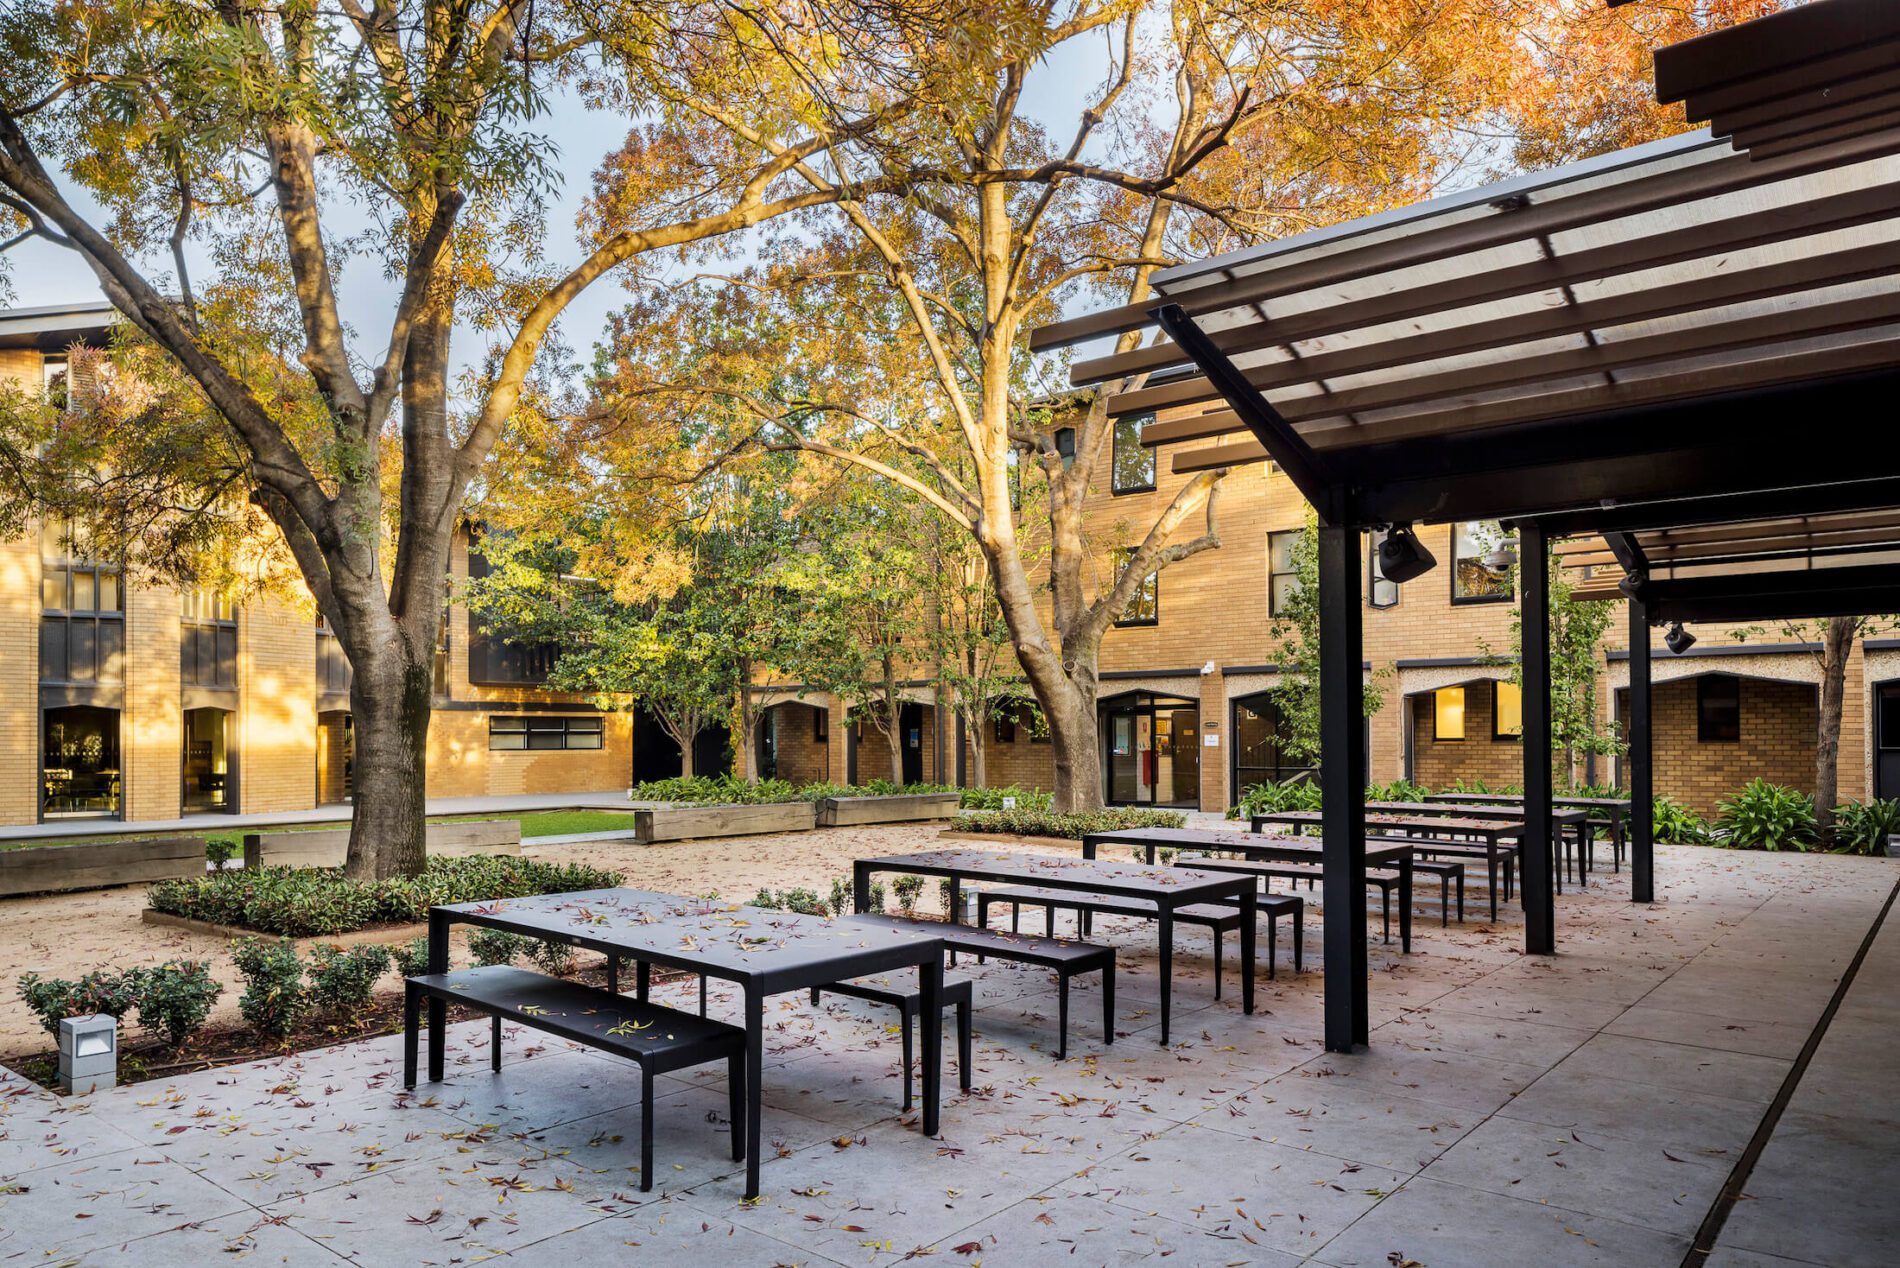 Outdoor dining tables and chairs in student residence courtyard with large existing trees